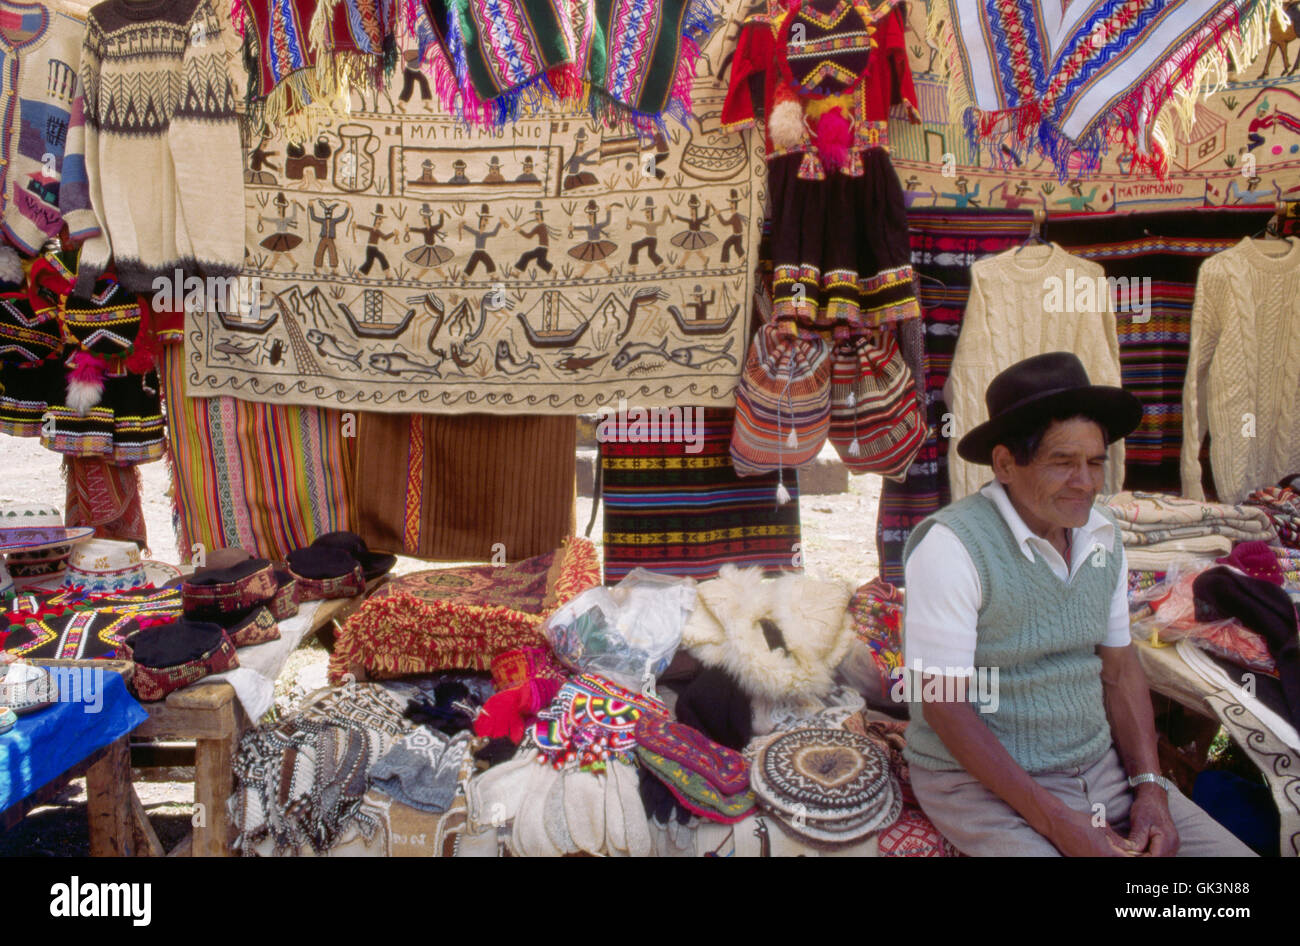 ca. 1980-1995, Pisac, Peru --- Knitted and woven goods for sale at a craft market in the Peruvian town of Pisac. --- Image by © Stock Photo